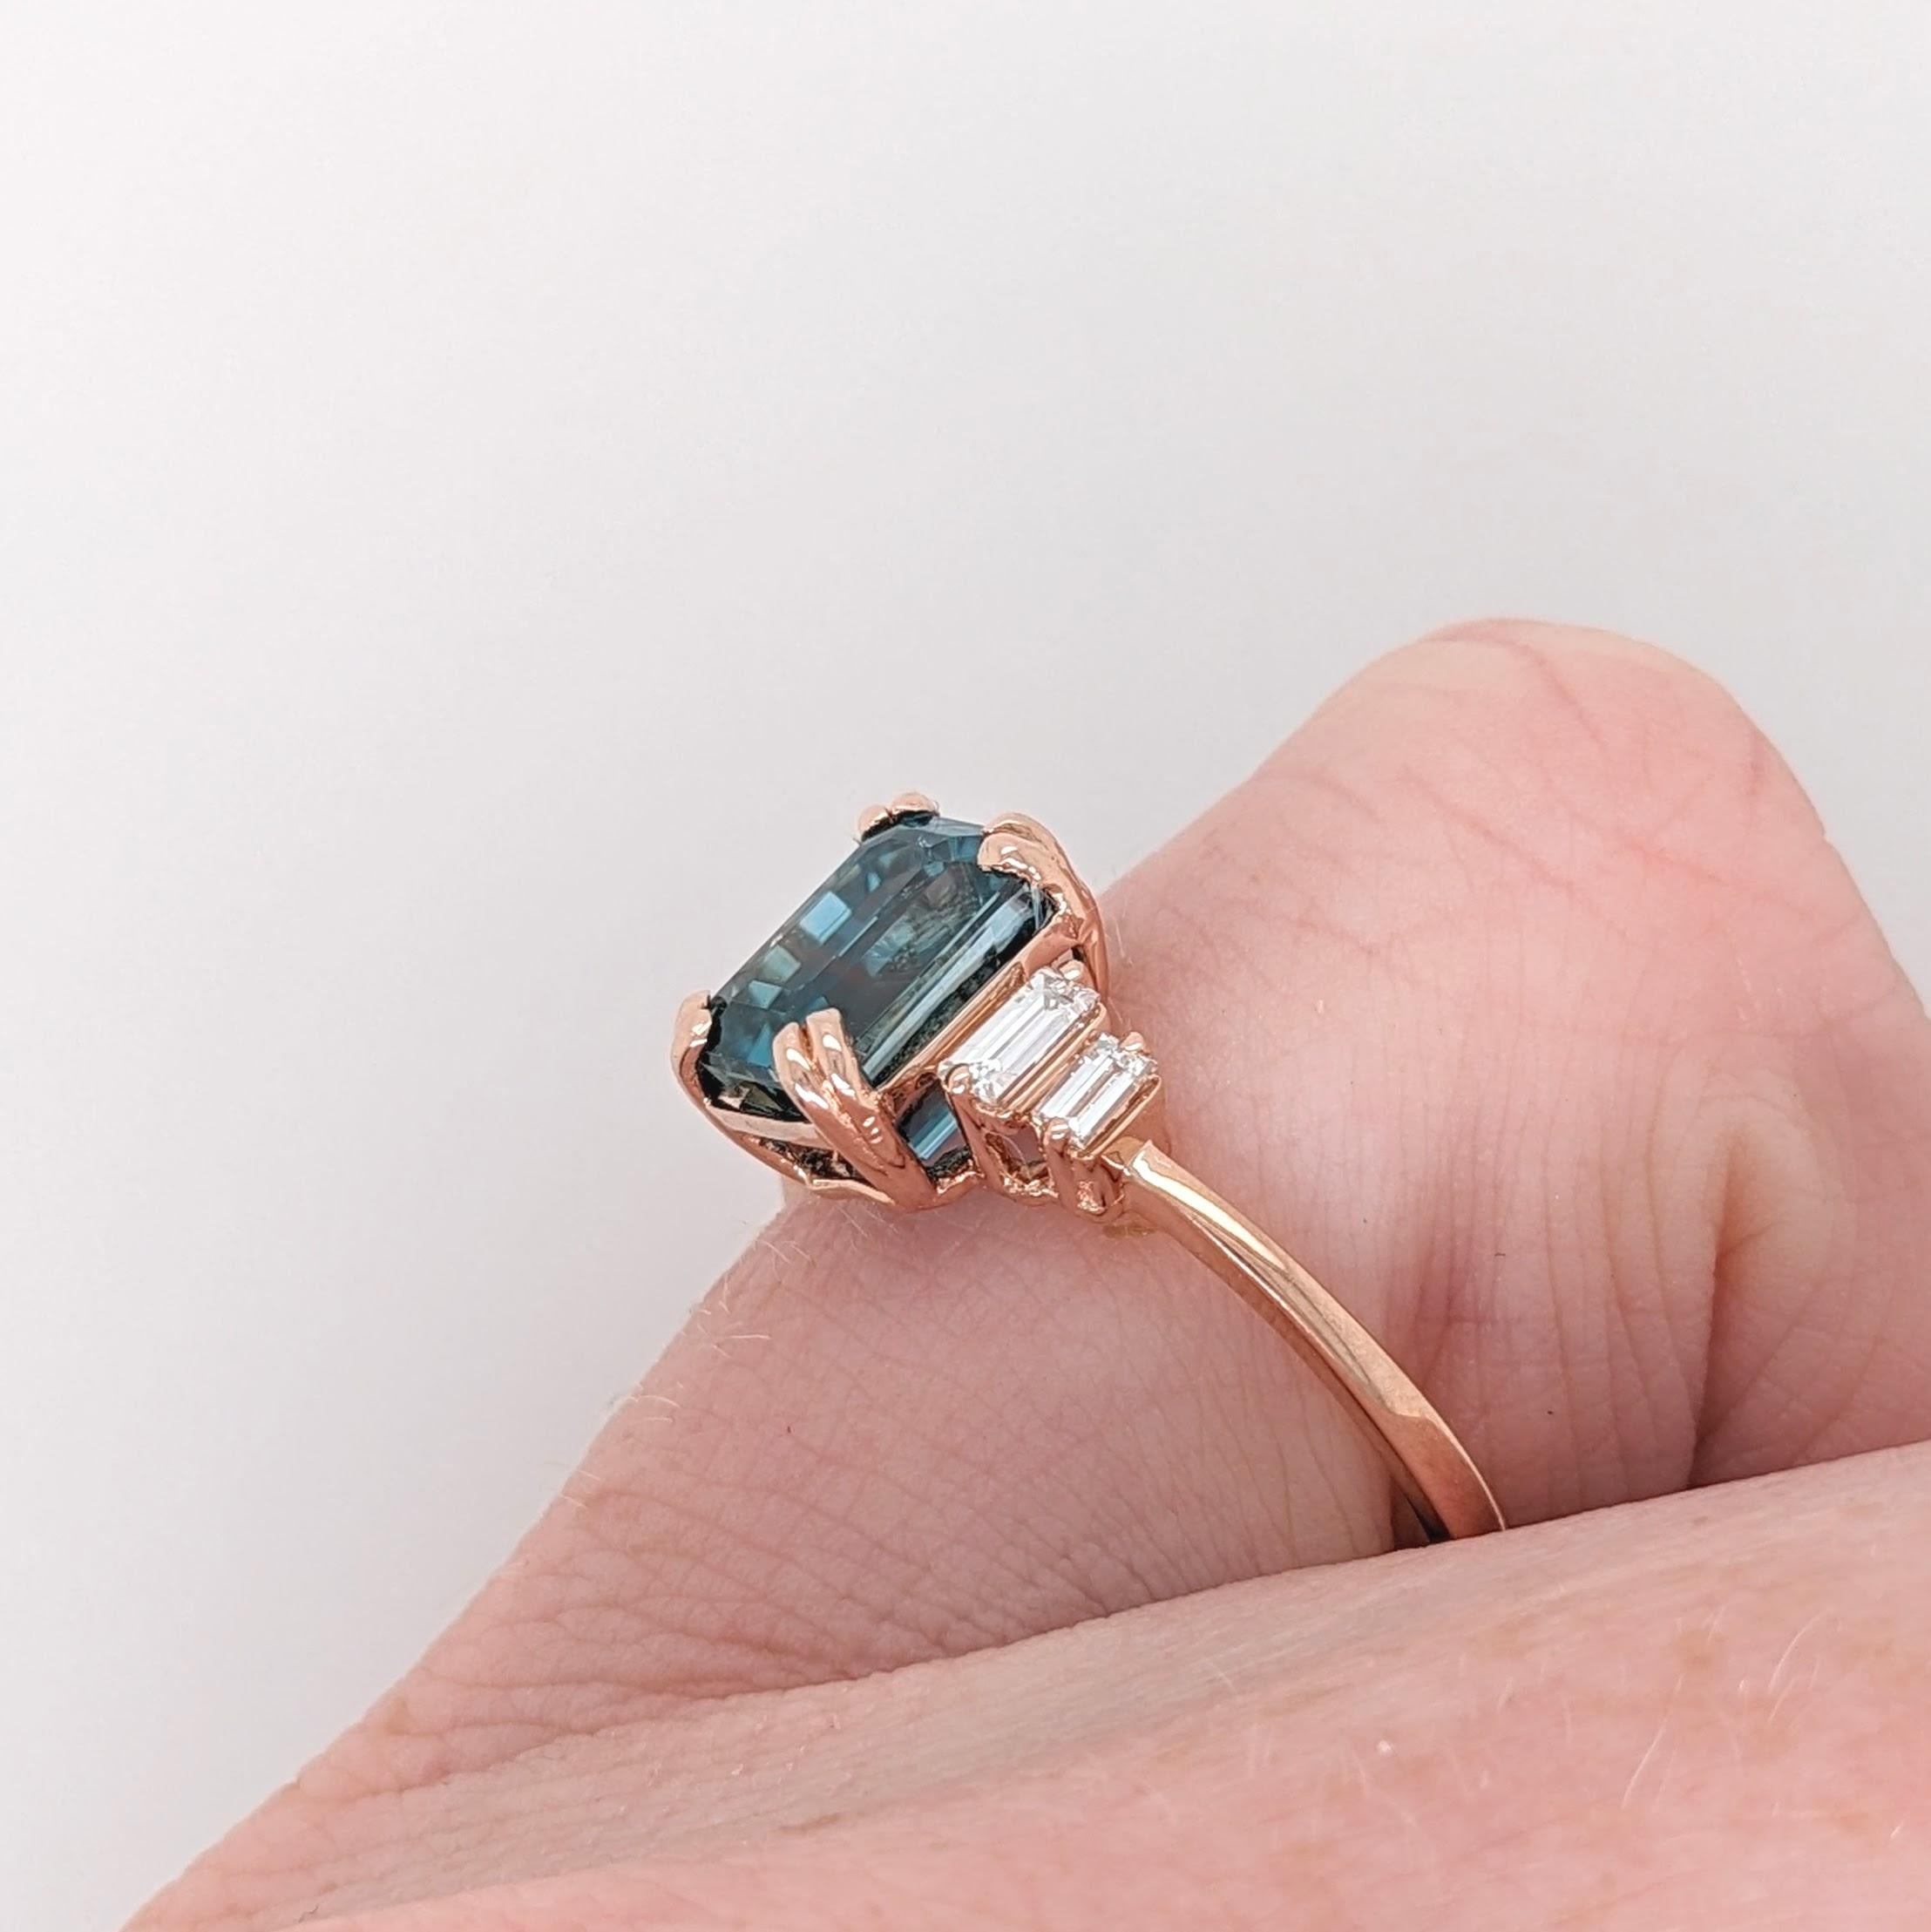 3.66ct Zircon Ring w Diamond Accents in 14K Rose Gold Emerald Cut 8.5x6mm For Sale 3